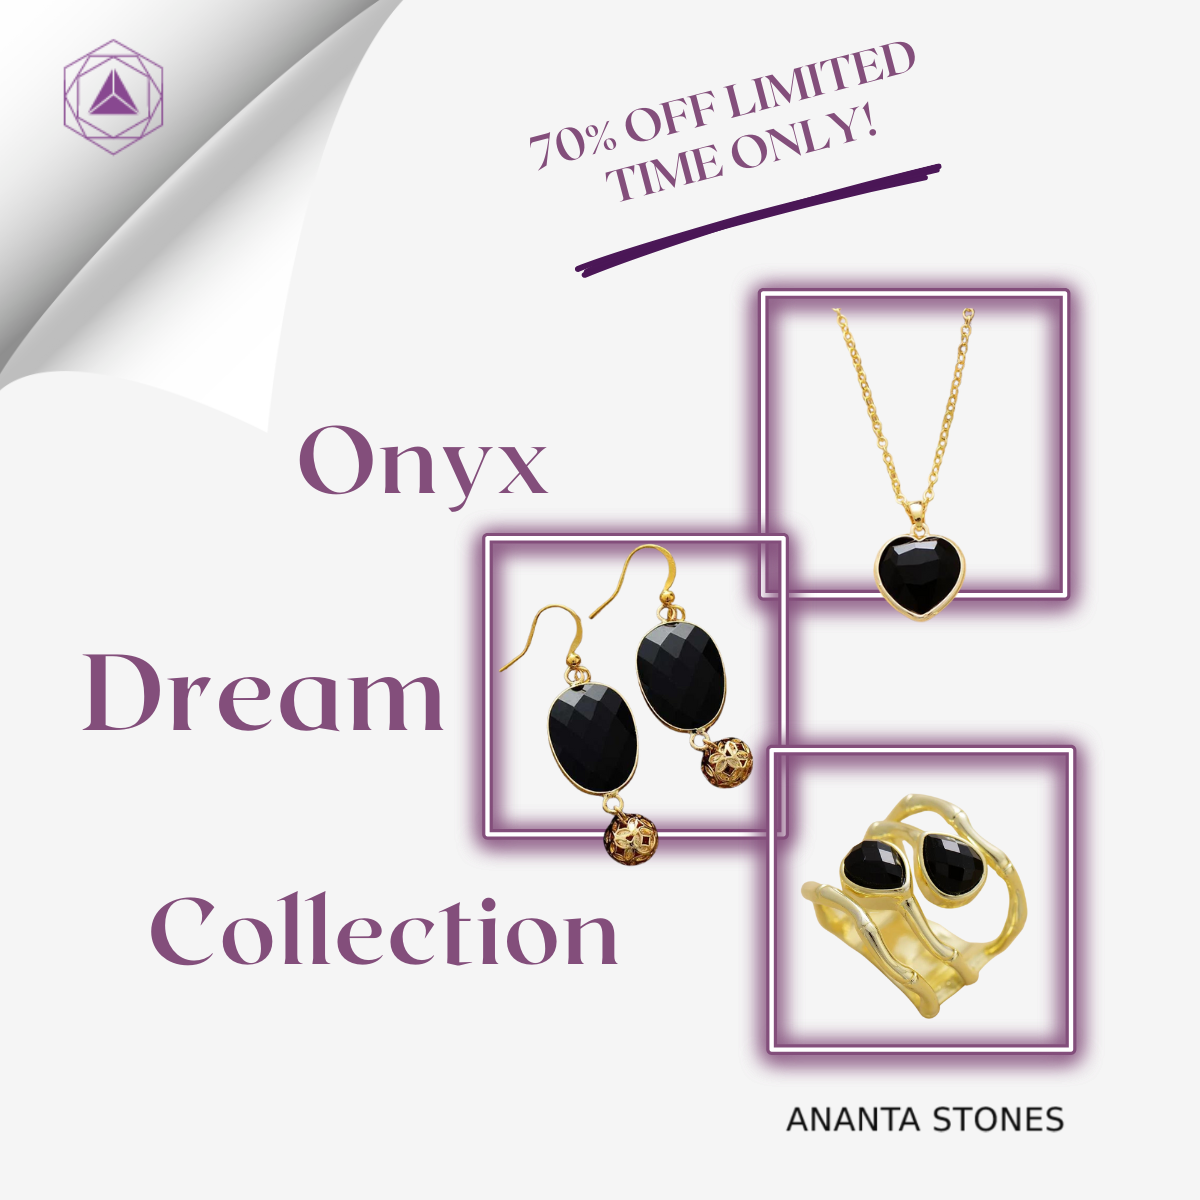 Onyx Dream Collection